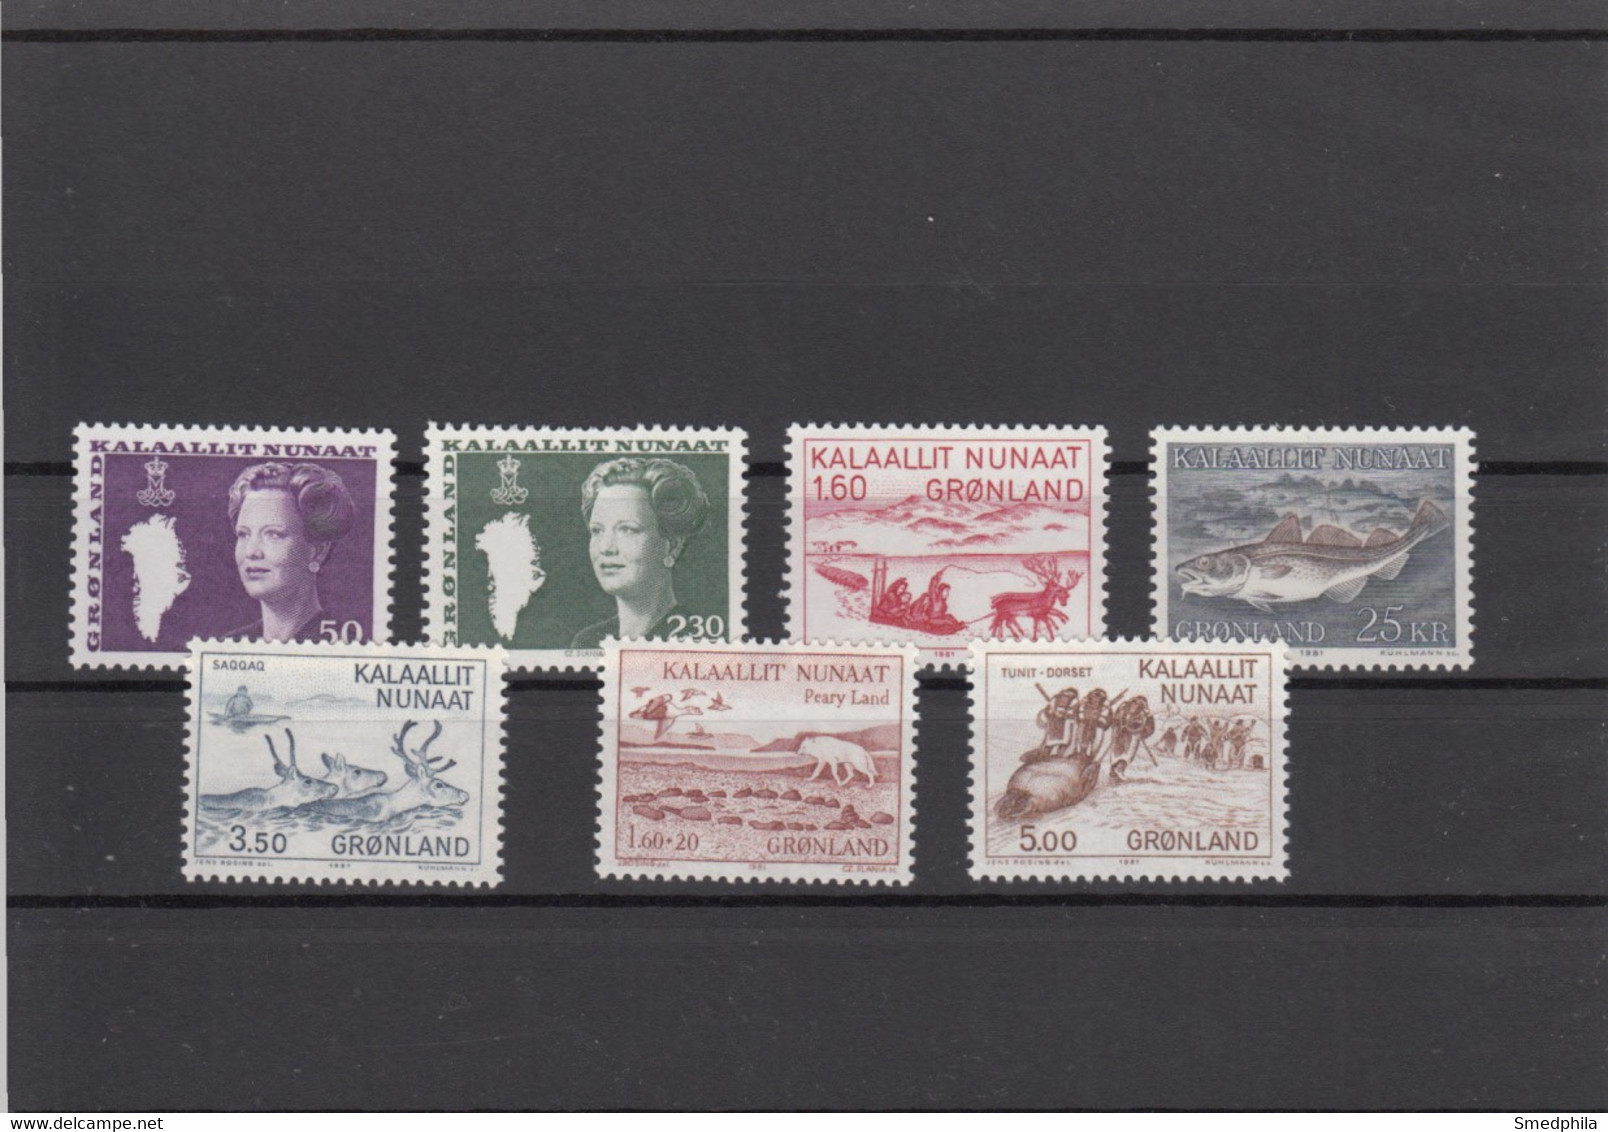 Greenland 1981 - Full Year MNH ** - Années Complètes